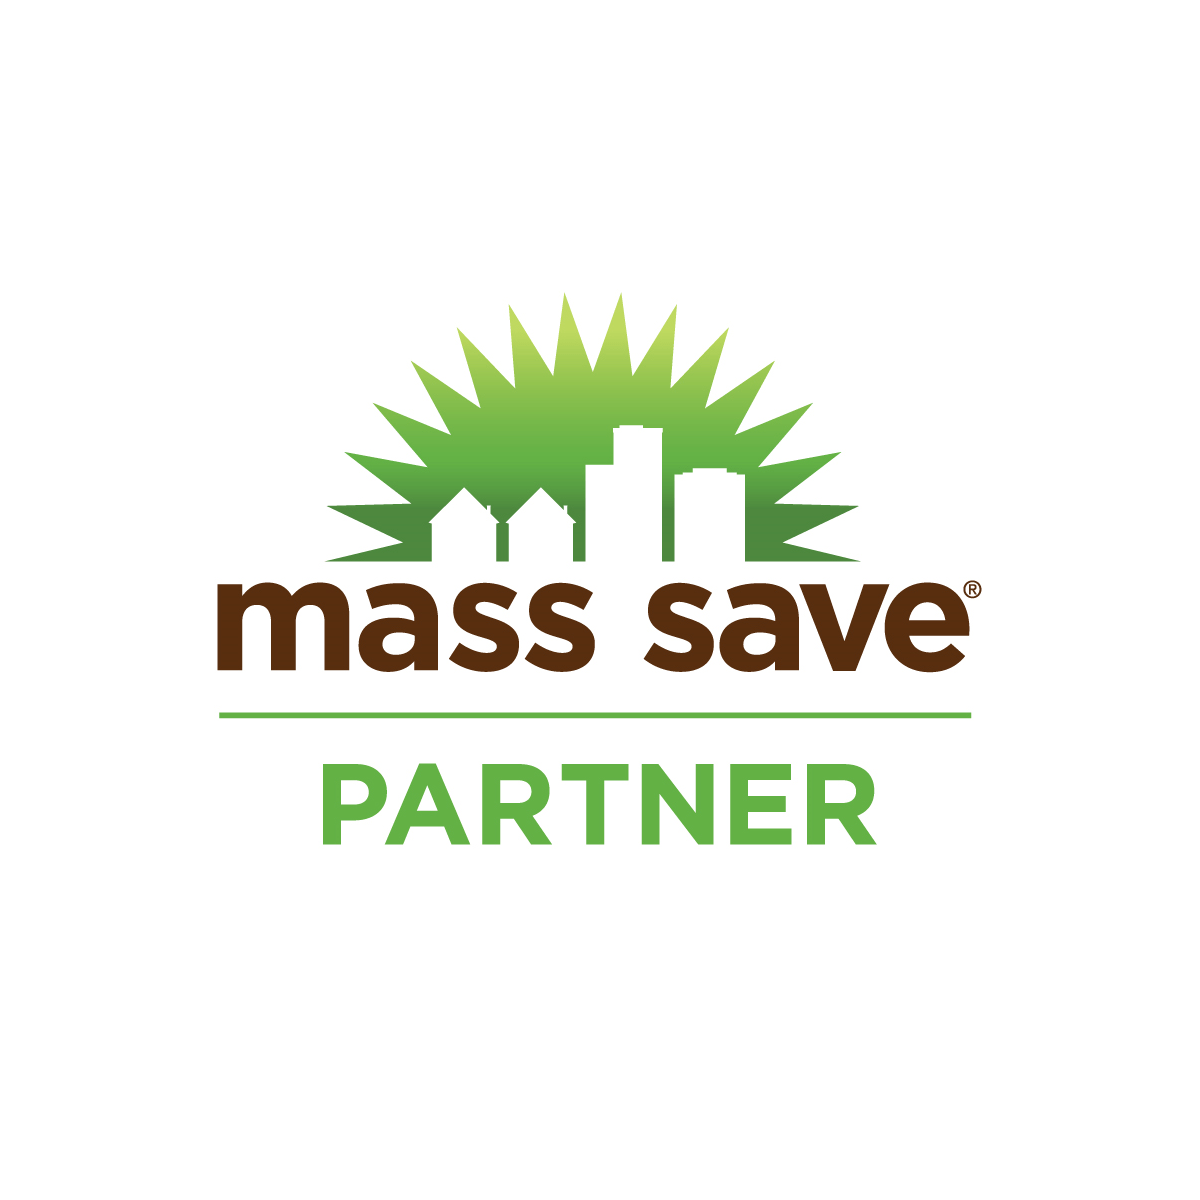 Mass Save Partner to offer Mass Save Customers $10,000 Rebate and a Heat Loan for 0% Interest for 7 Years